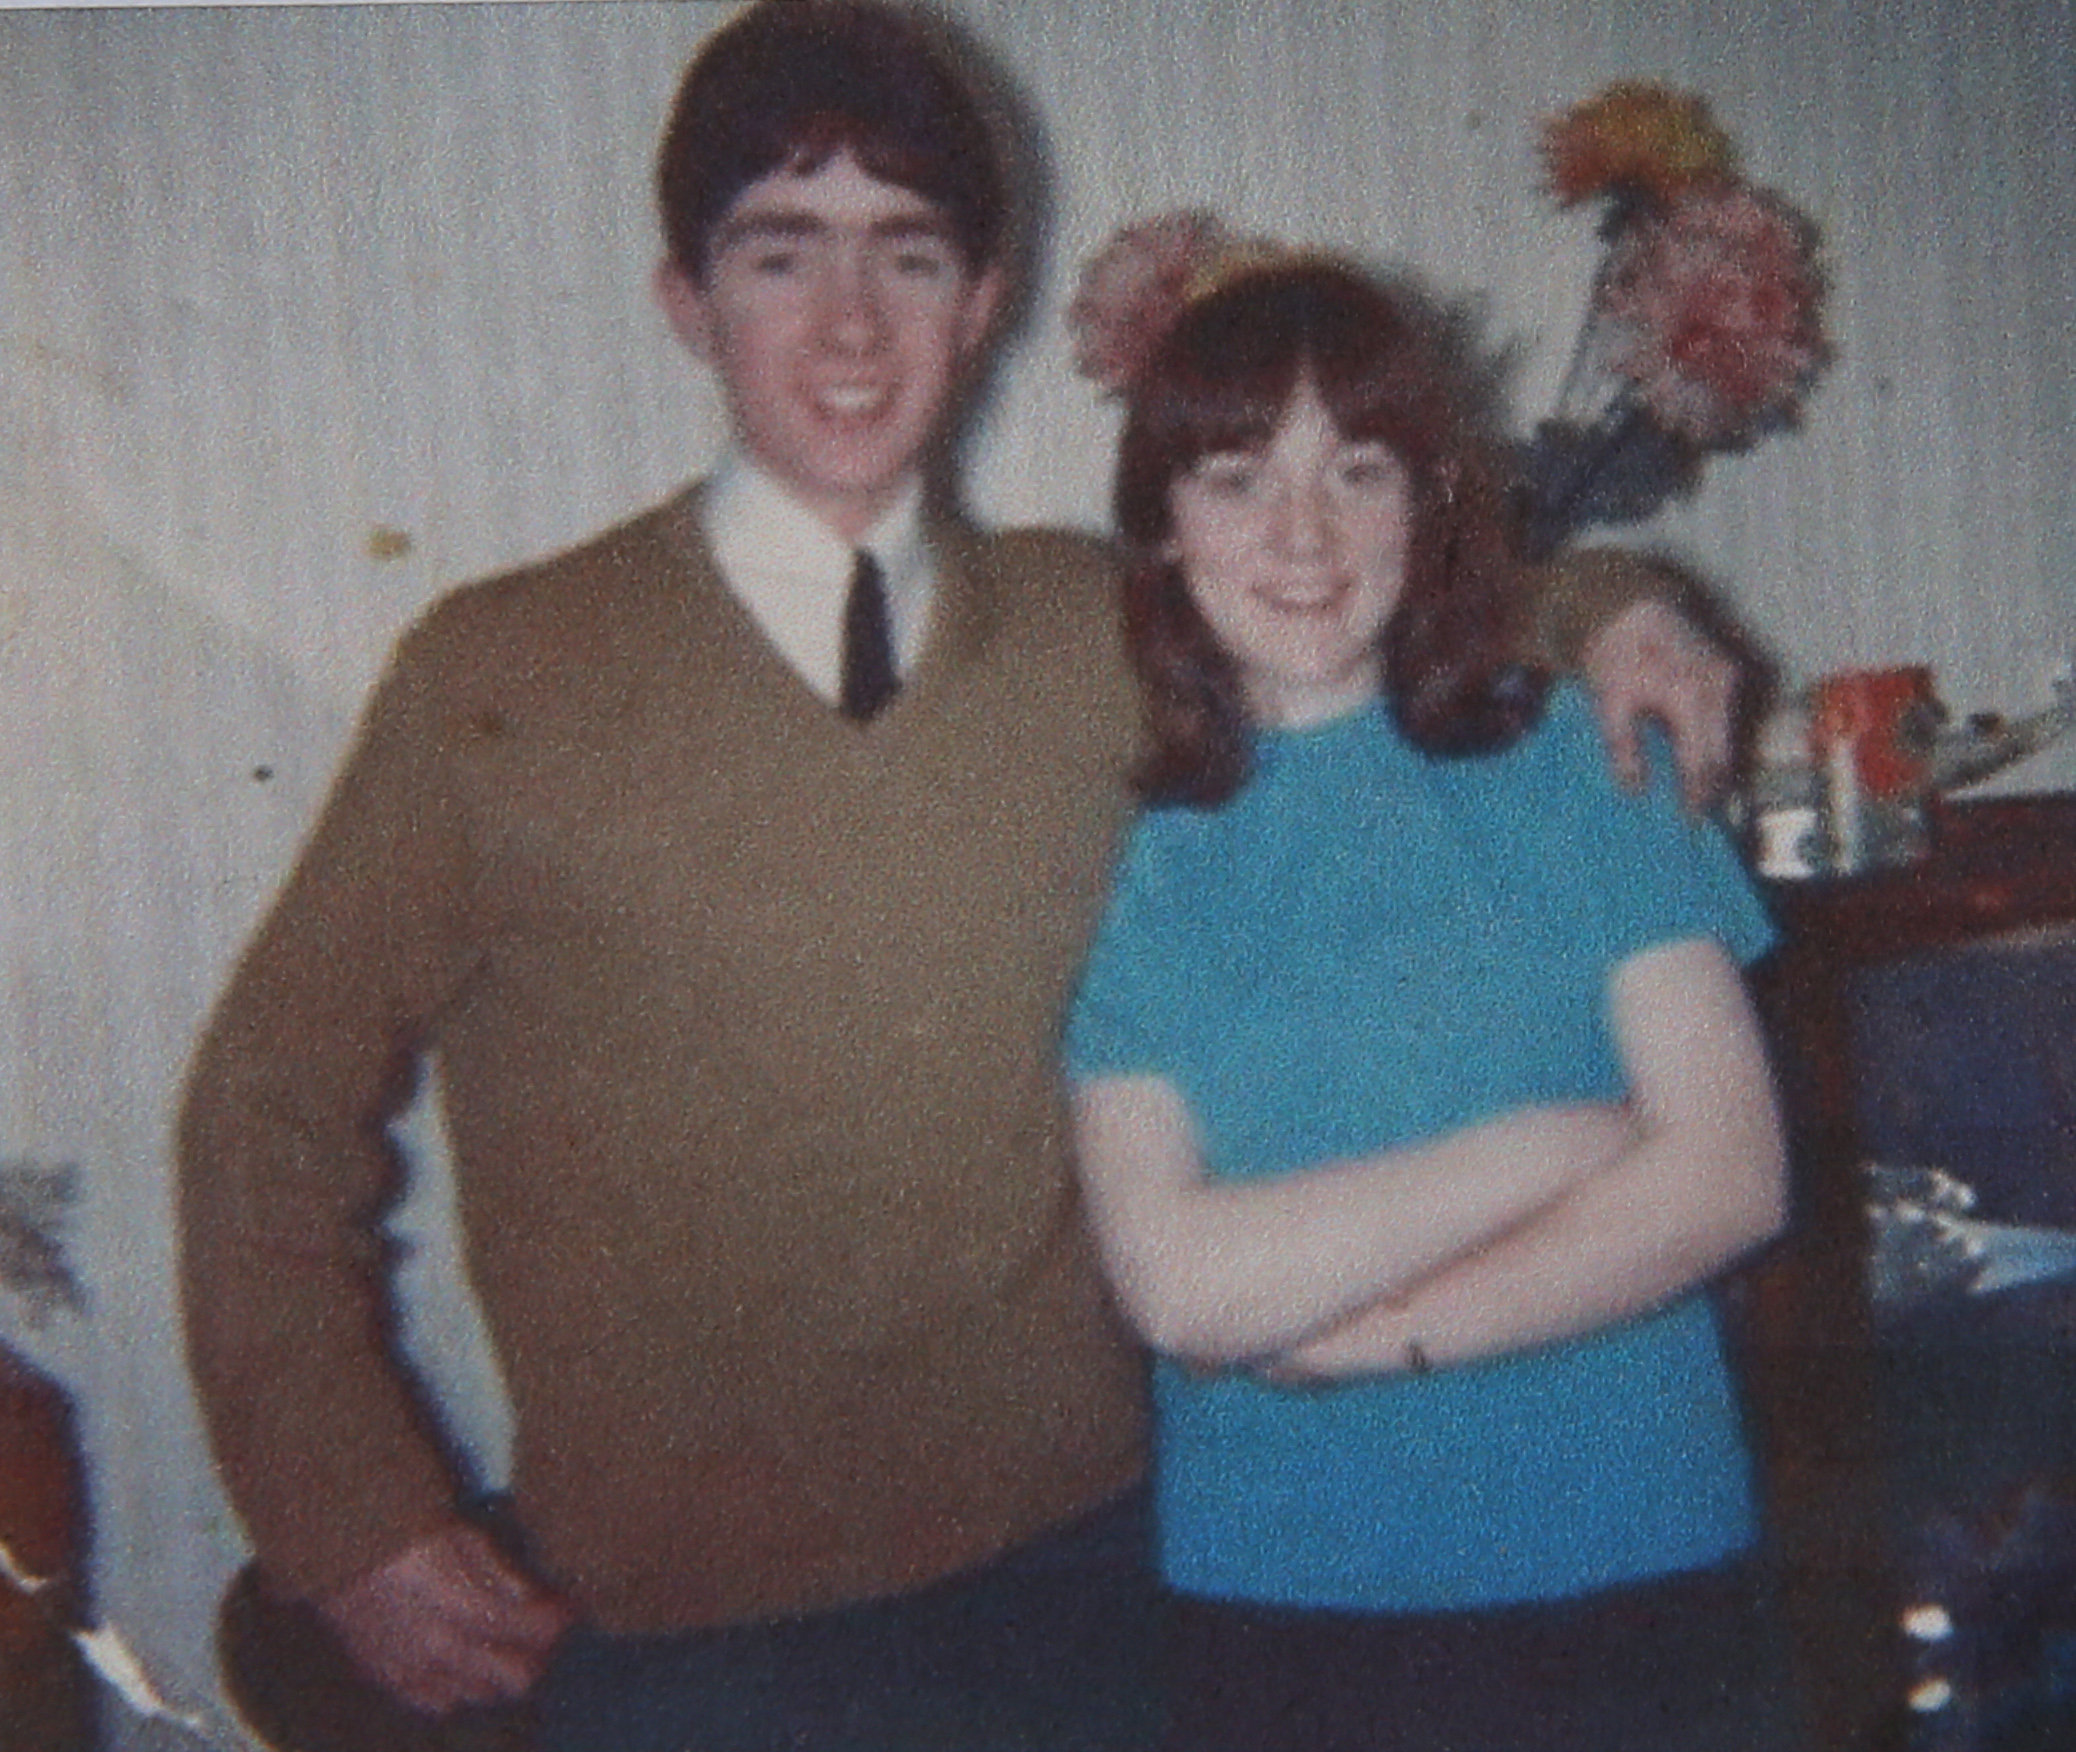 Glasgow Times past feature. Isabel and Brian McNulty pictured in 1965, both age 15... Isabel and Brian McNulty from Milton, Glasgow have been together for 53 years after meeting at school, courting at the dancing, and marrying at 18. ...5 May 2021.For